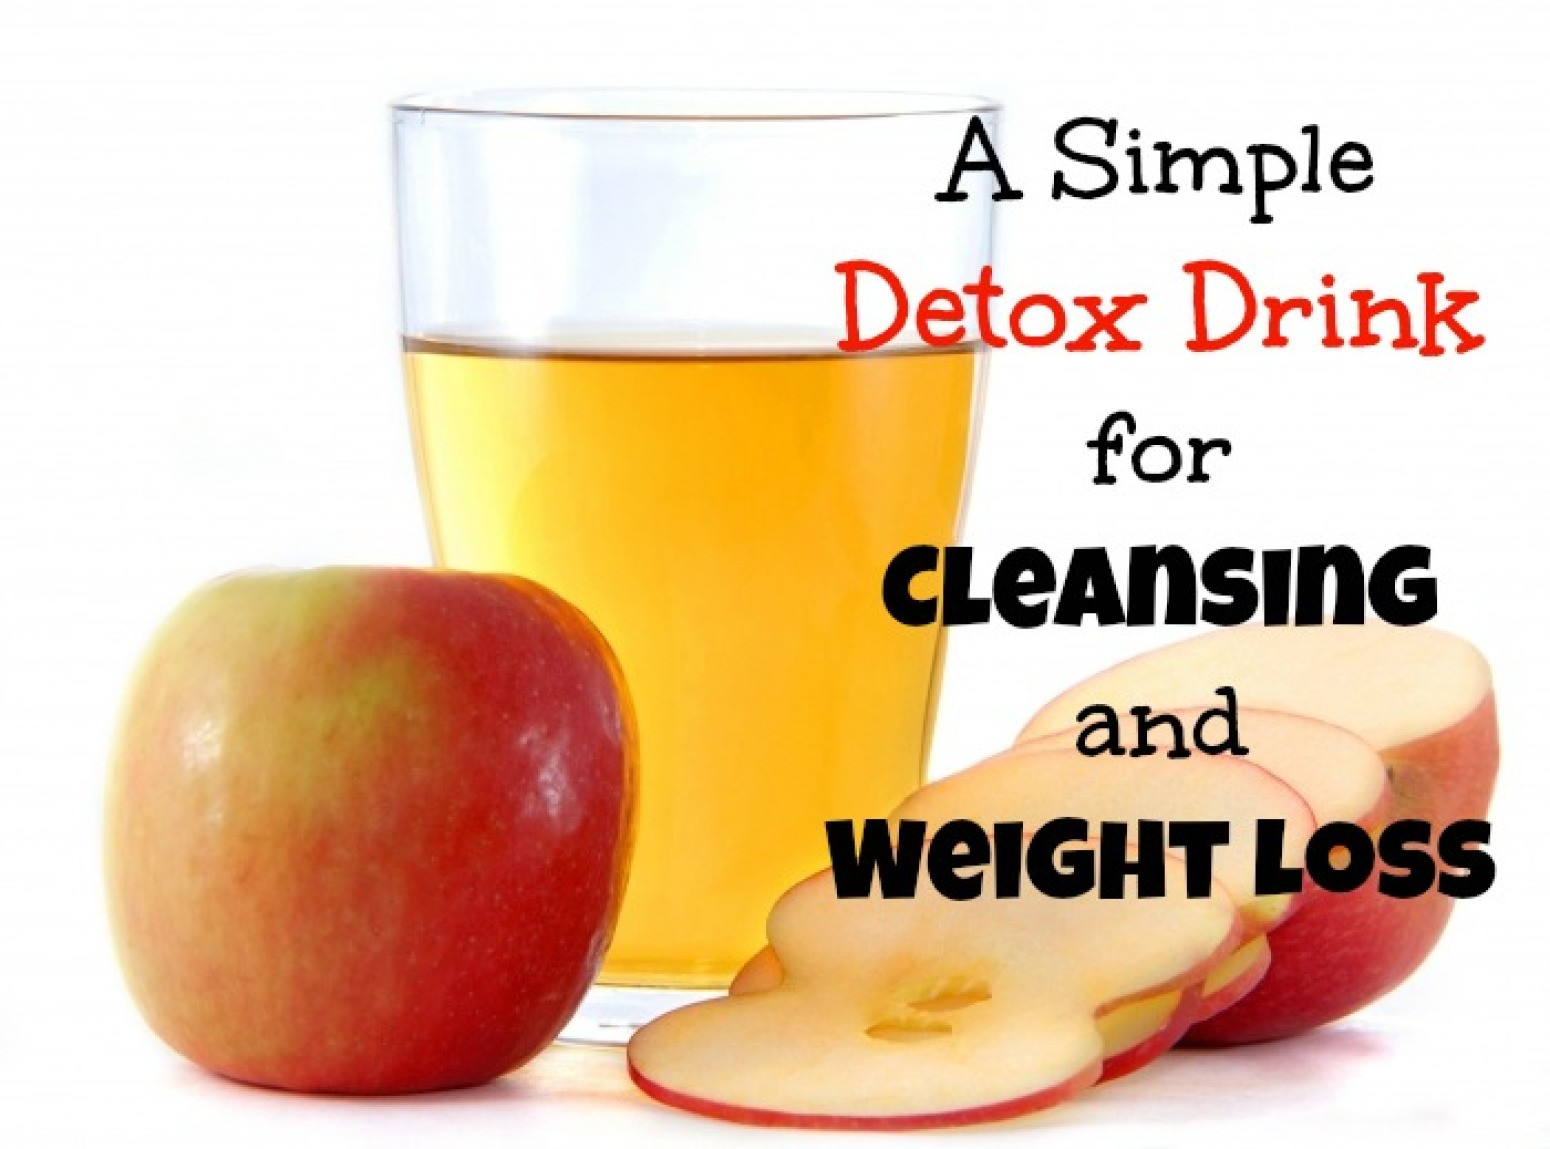 Weight Loss Detox Drinks Recipes
 Detox Drink for Cleansing and Weight Loss Recipe